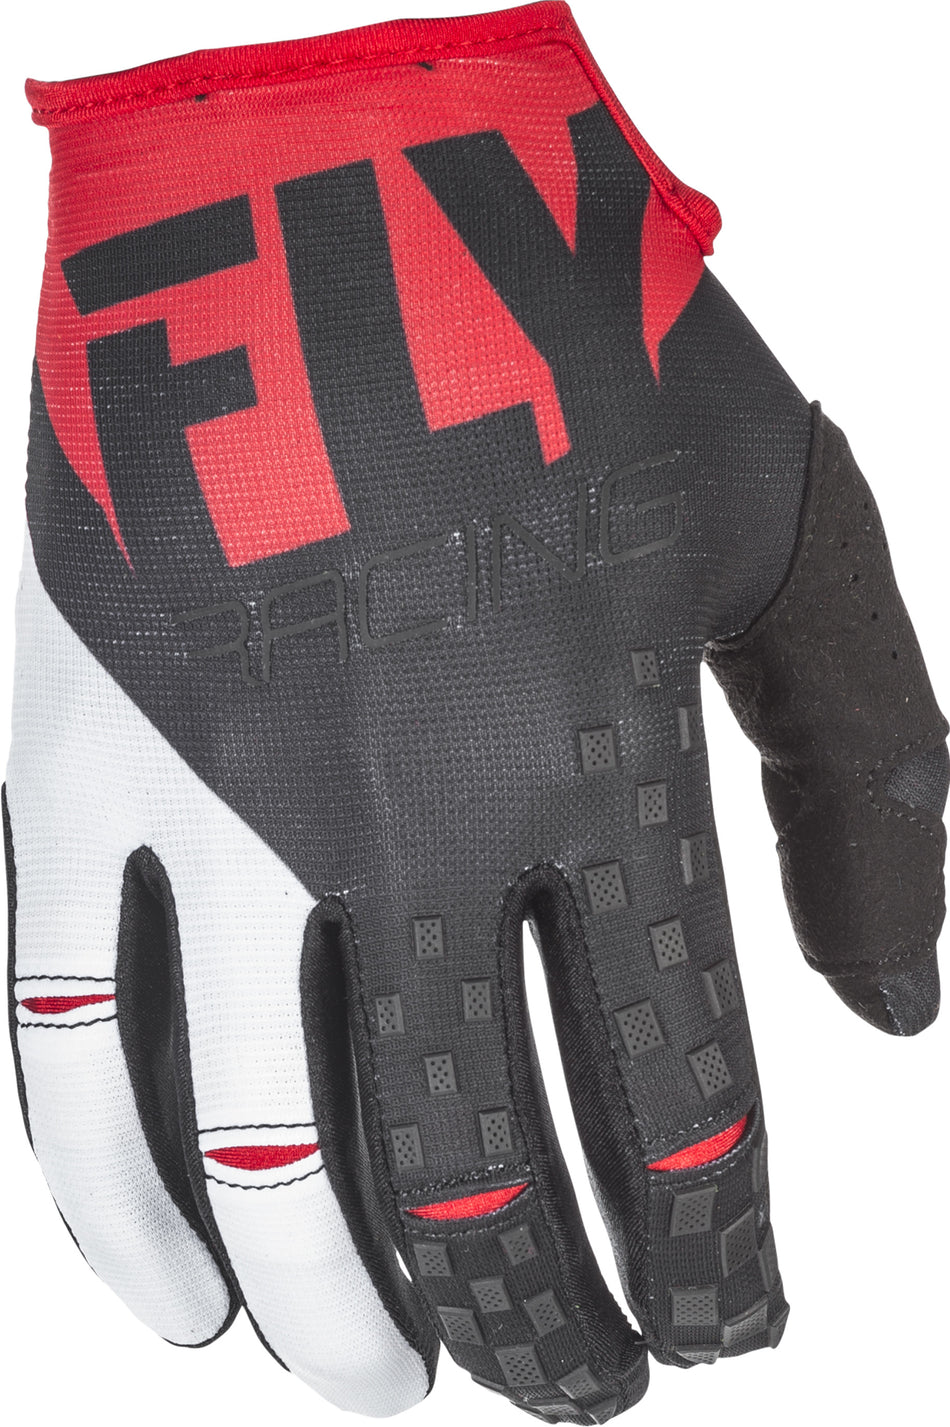 FLY RACING Kinetic Gloves Red/Black Sz 11 371-41211